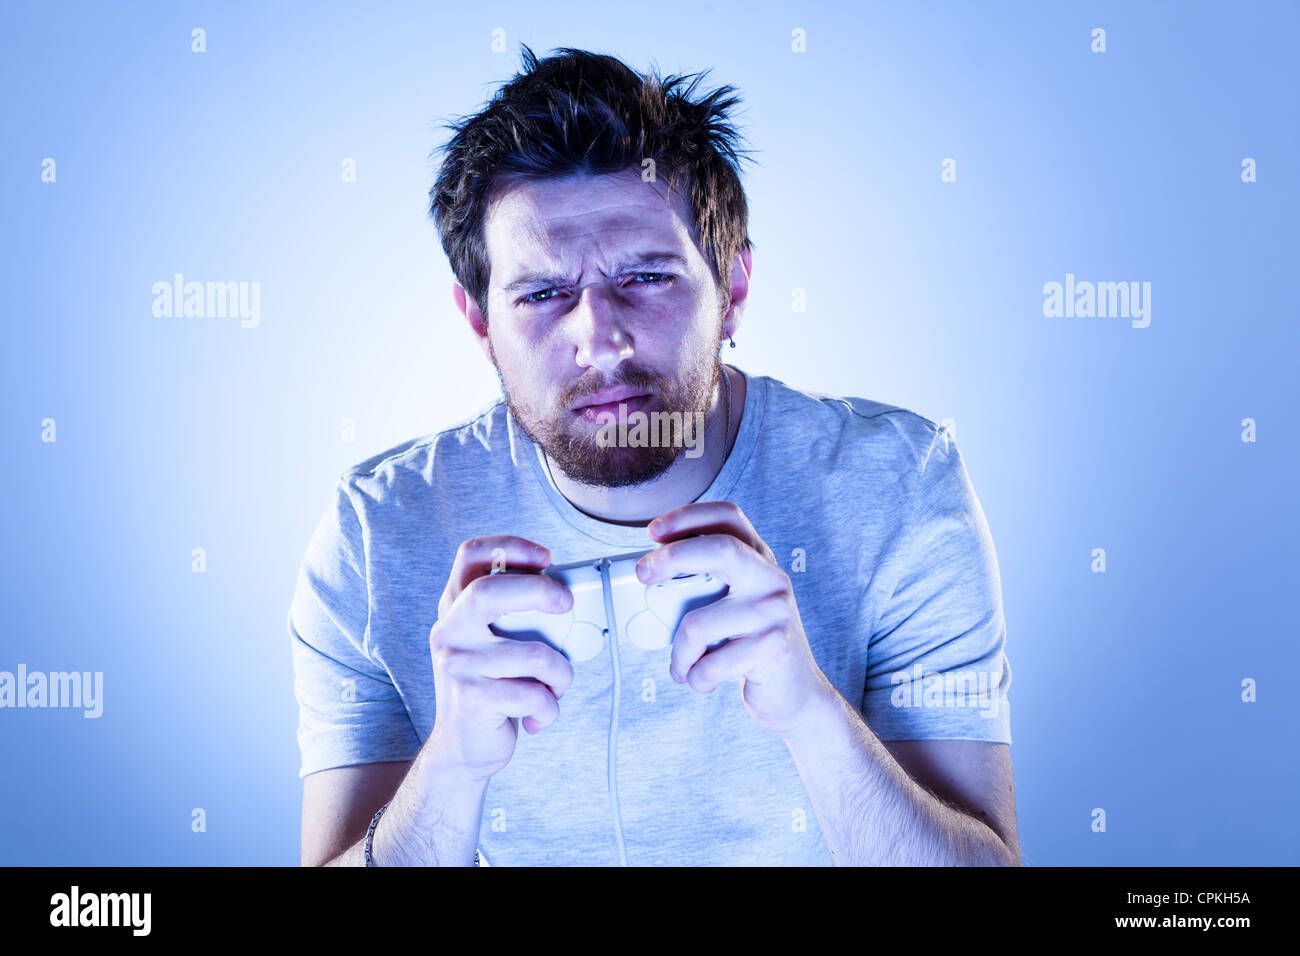 Concentrated Man Playing Videogames with Gamepad Stock Photo